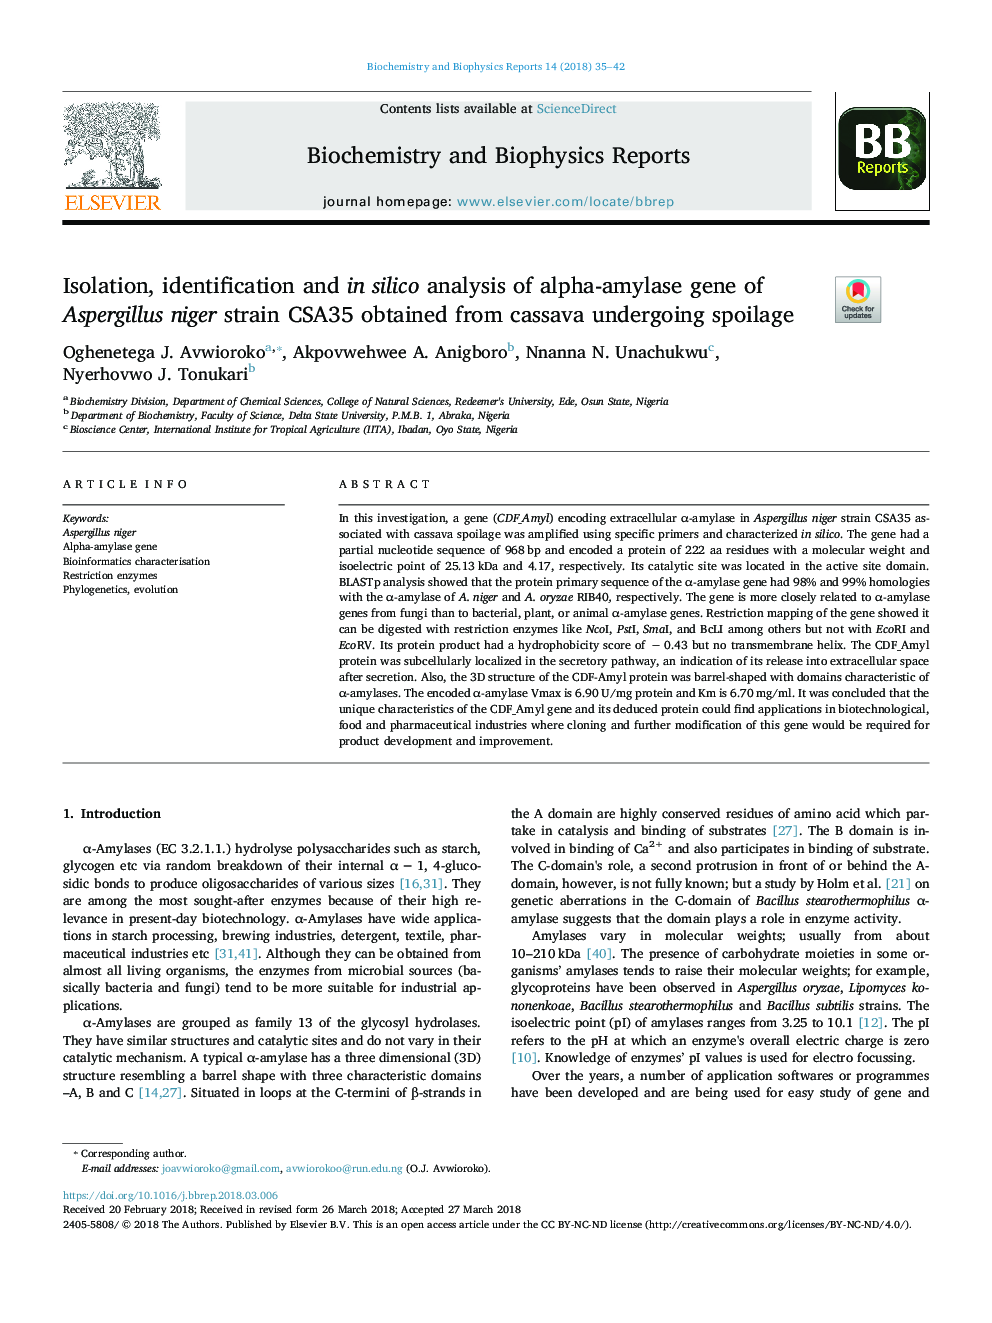 Isolation, identification and in silico analysis of alpha-amylase gene of Aspergillus niger strain CSA35 obtained from cassava undergoing spoilage